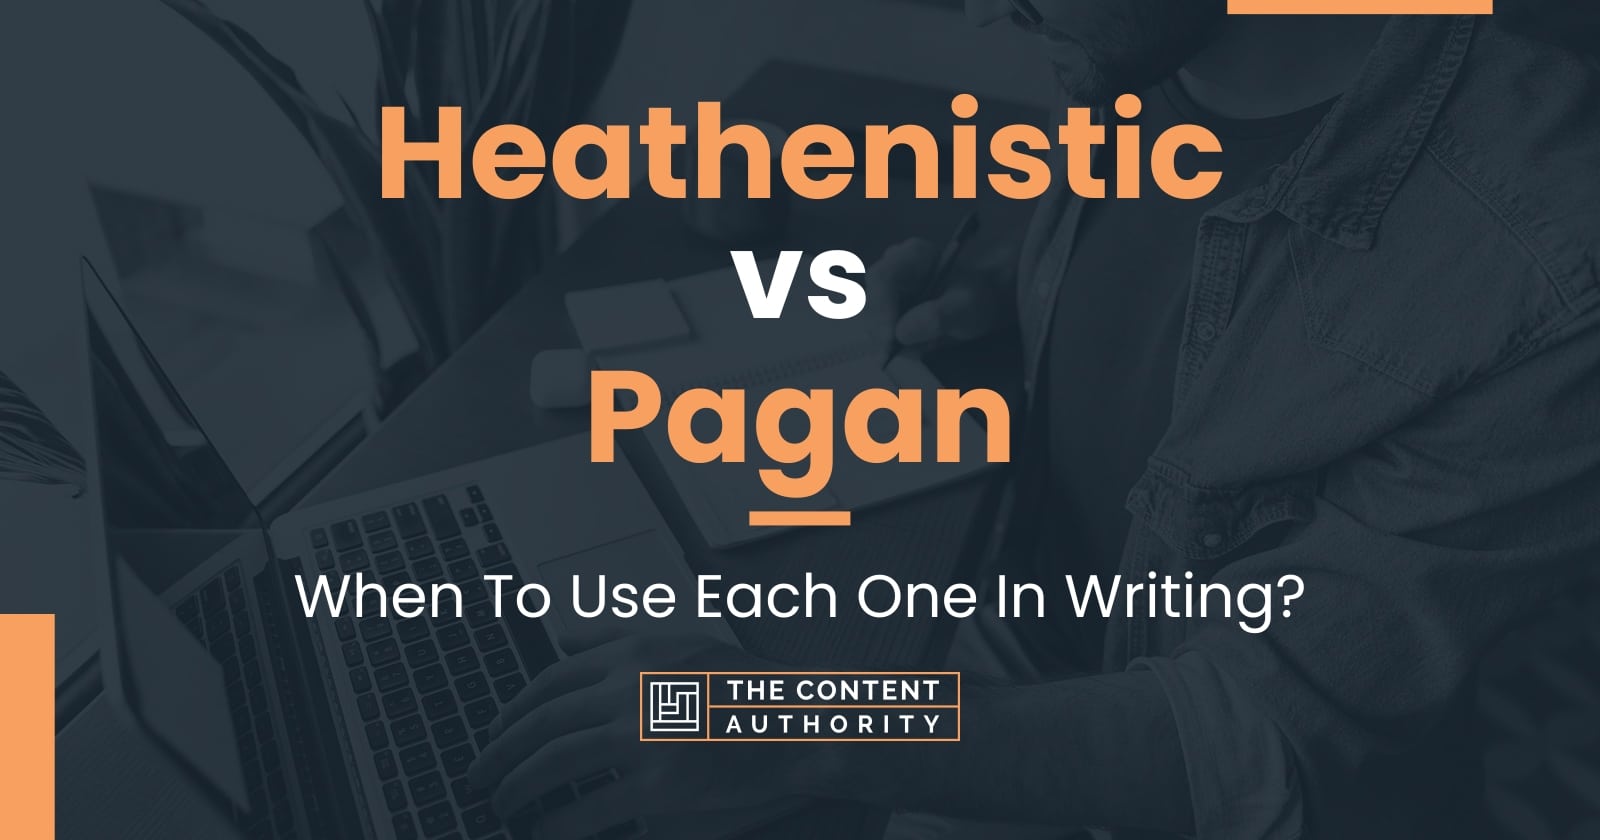 Heathenistic vs Pagan: When To Use Each One In Writing?